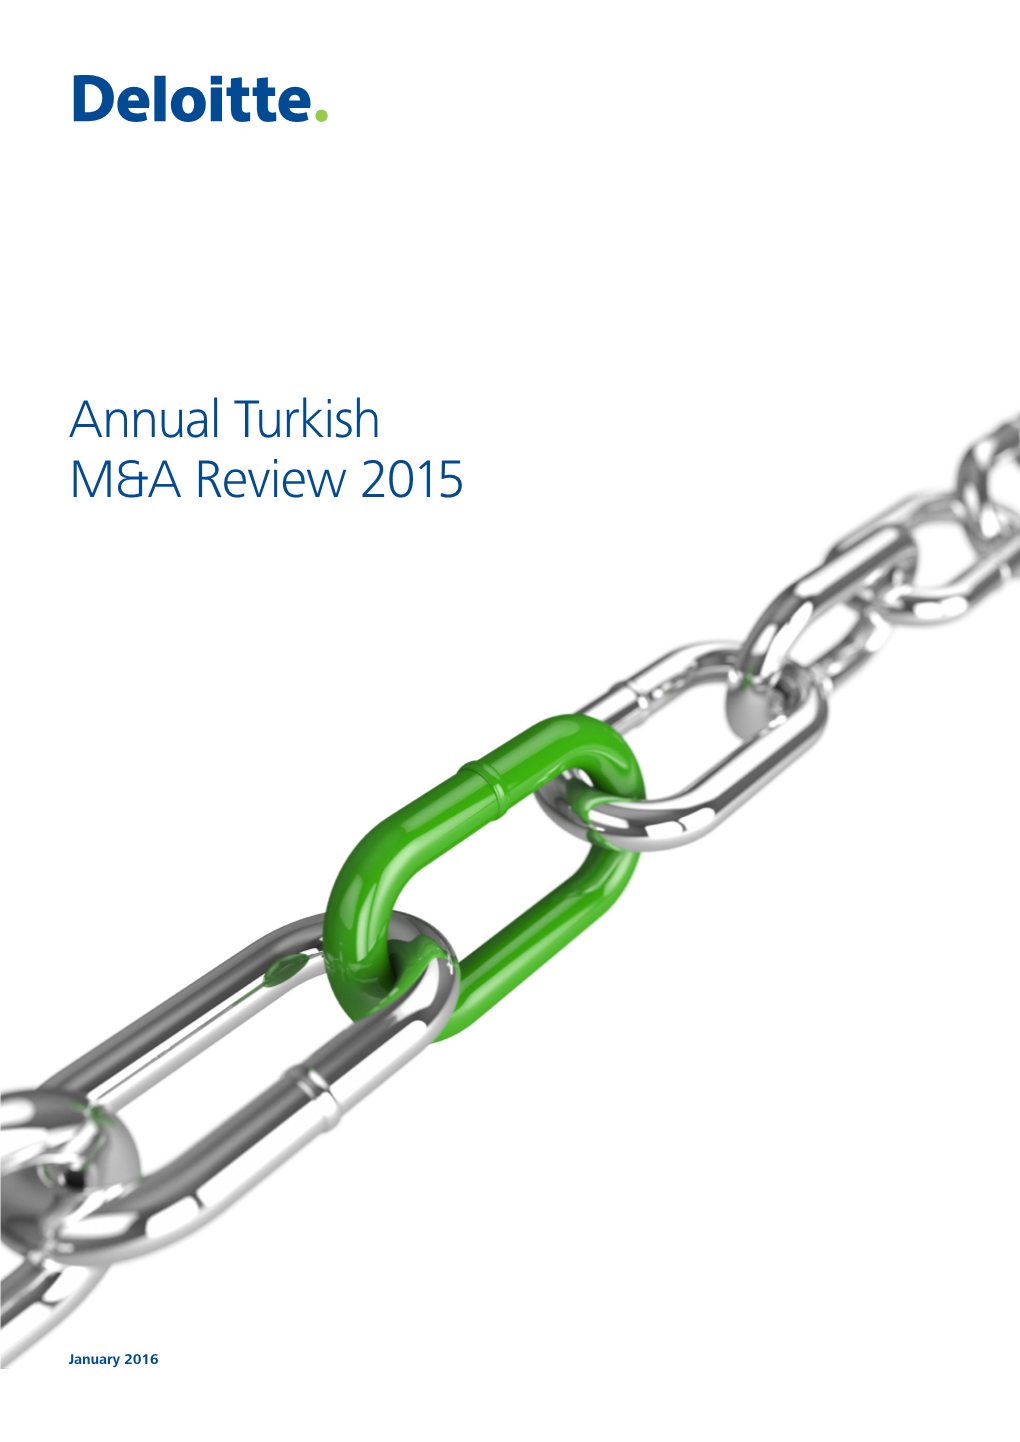 Annual Turkish M&A Review 2015